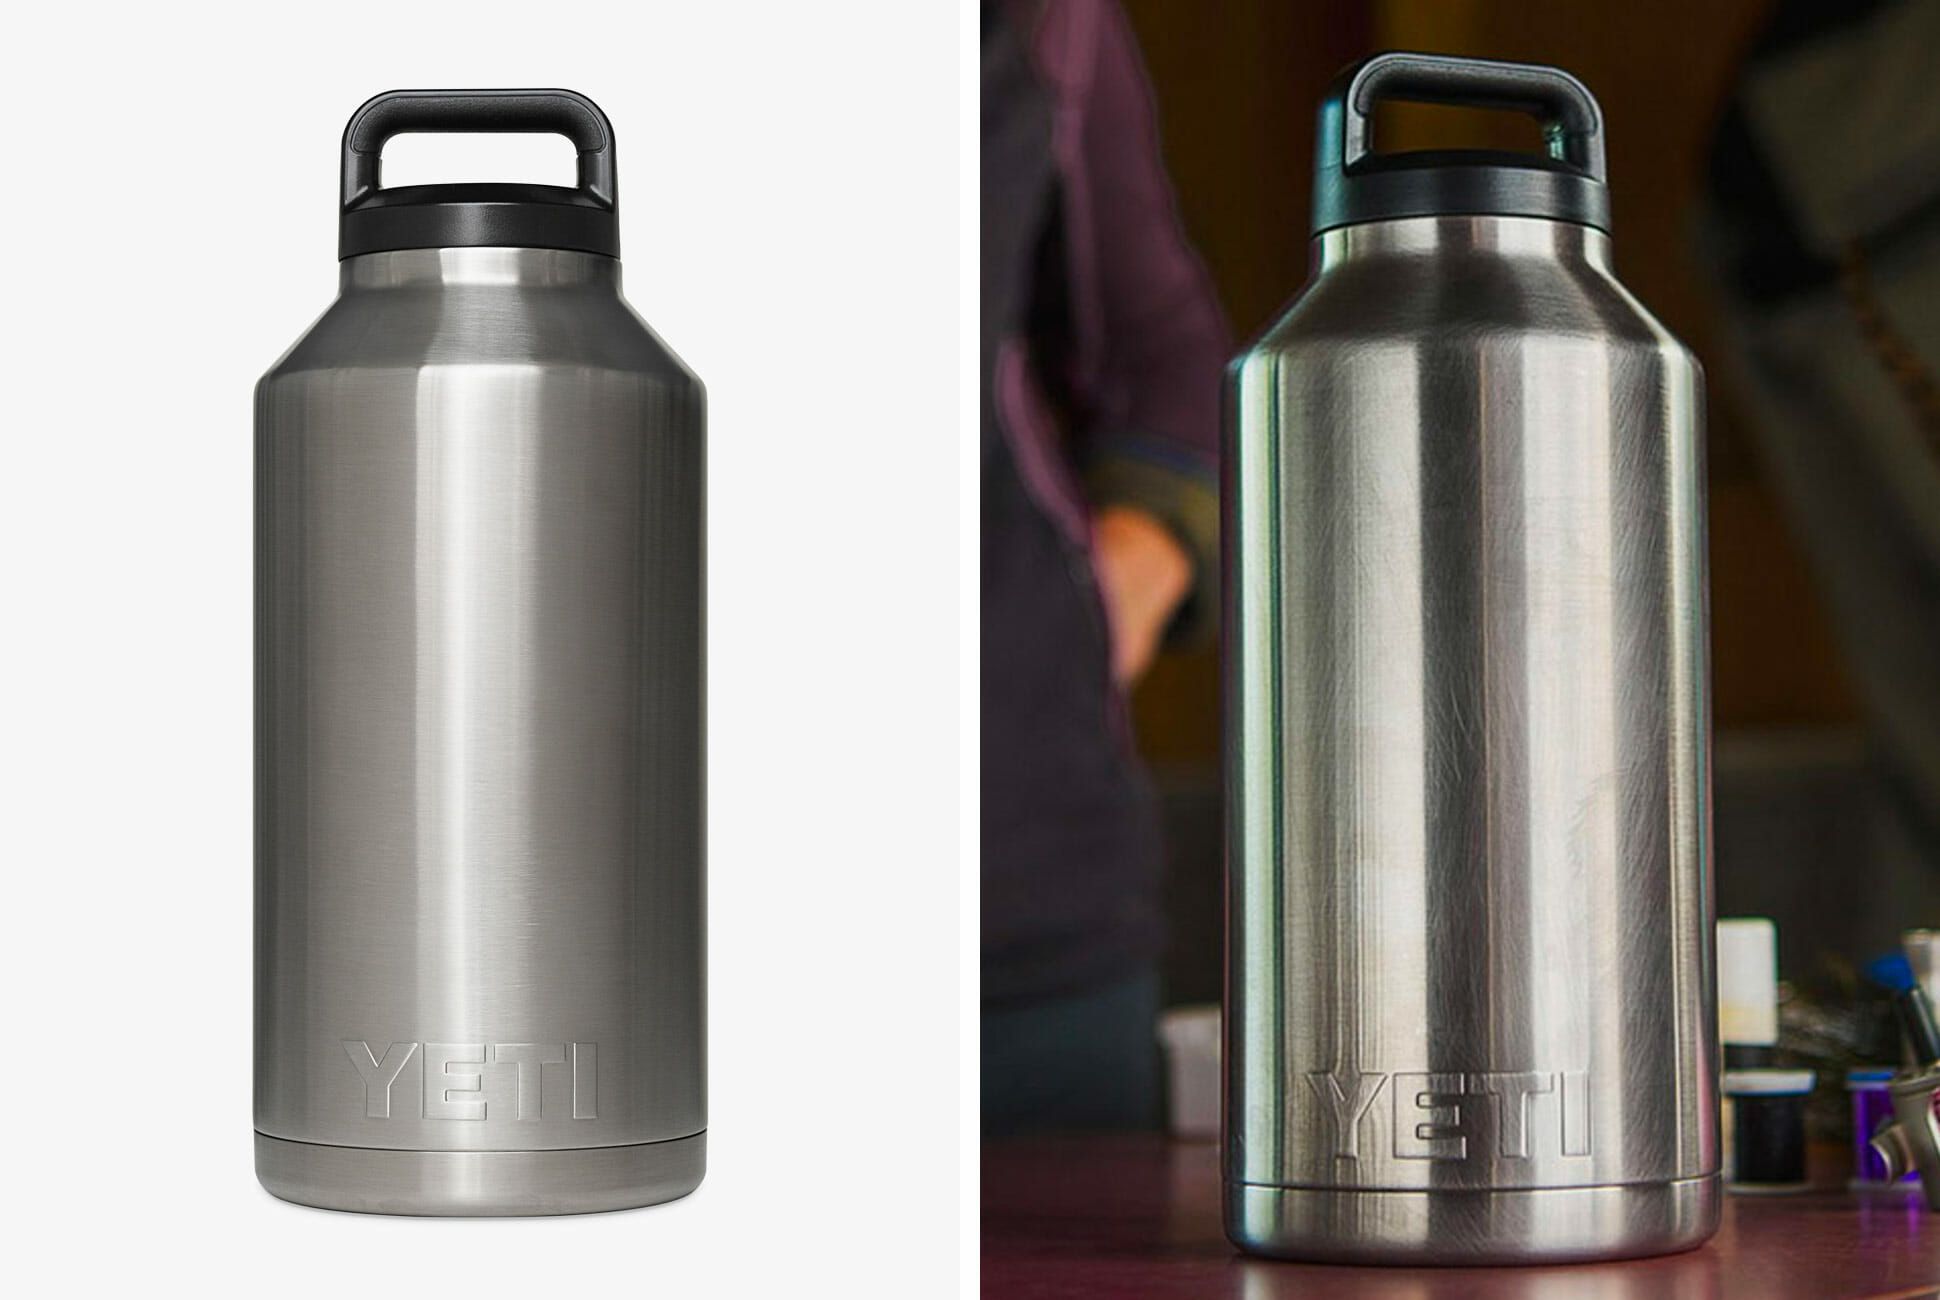 Pick Up a Yeti Growler for $20 Off Today